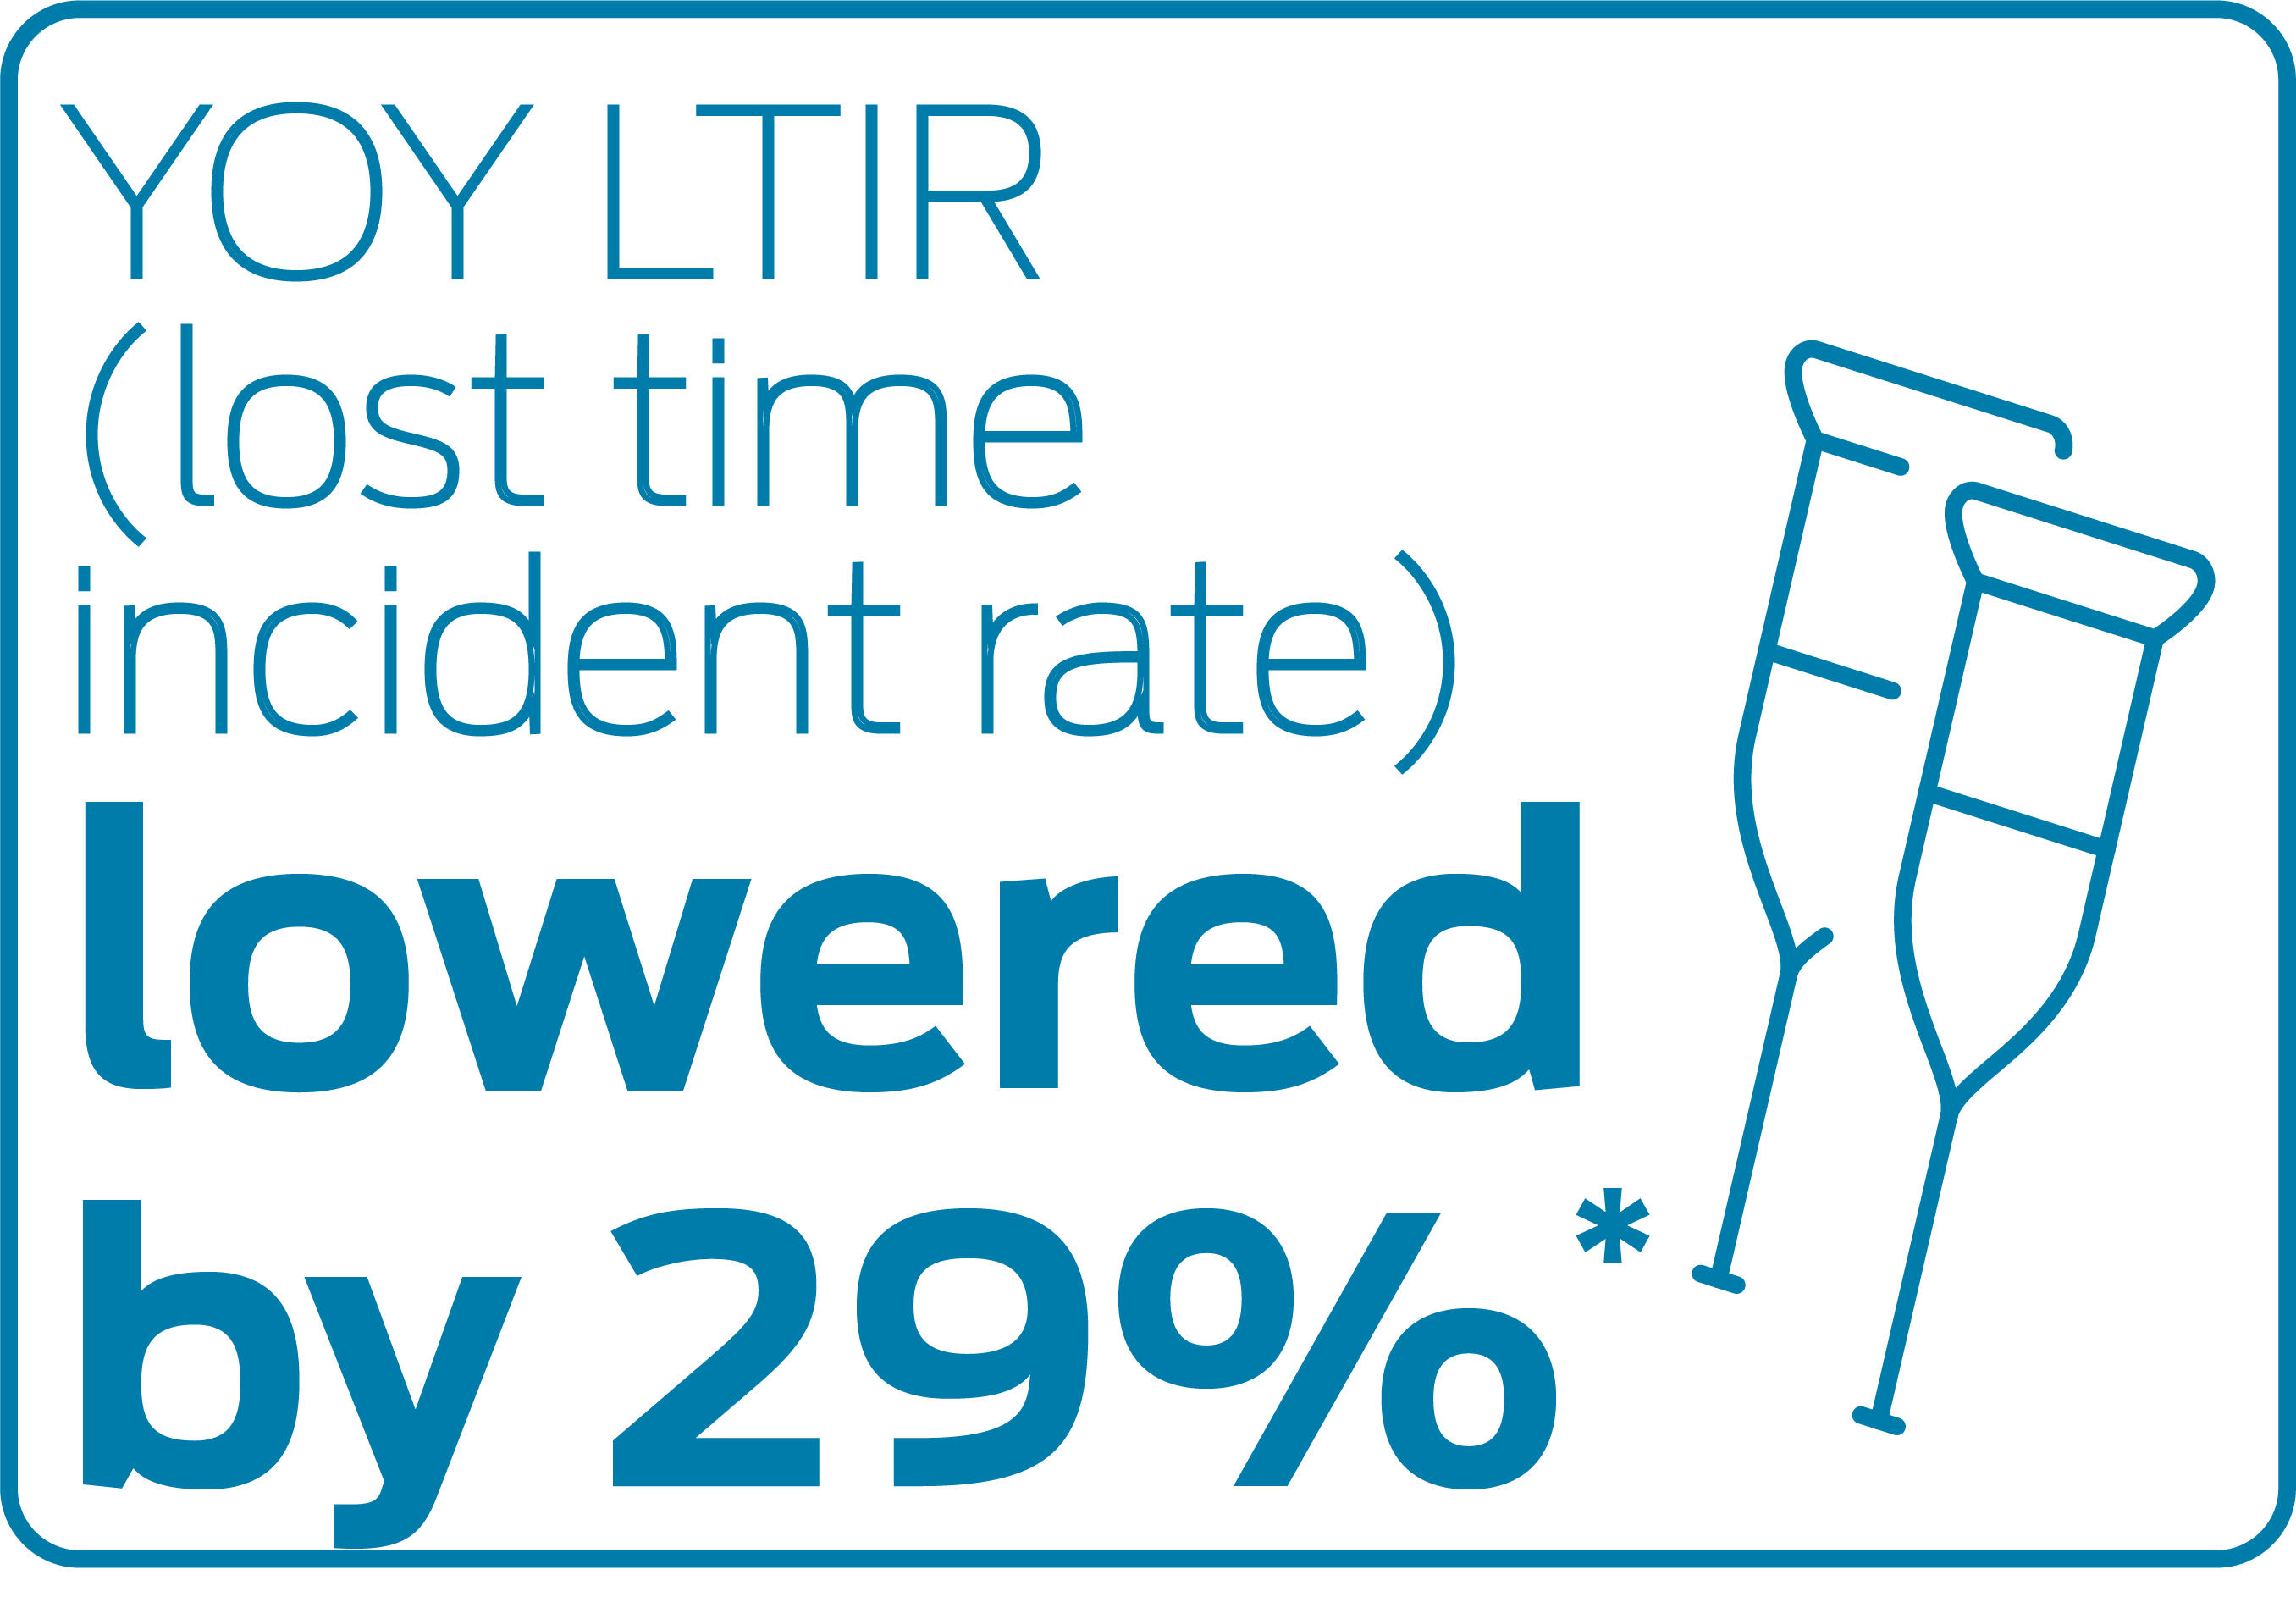 YOY LTIR (lost time incident rate) lowered by 29%